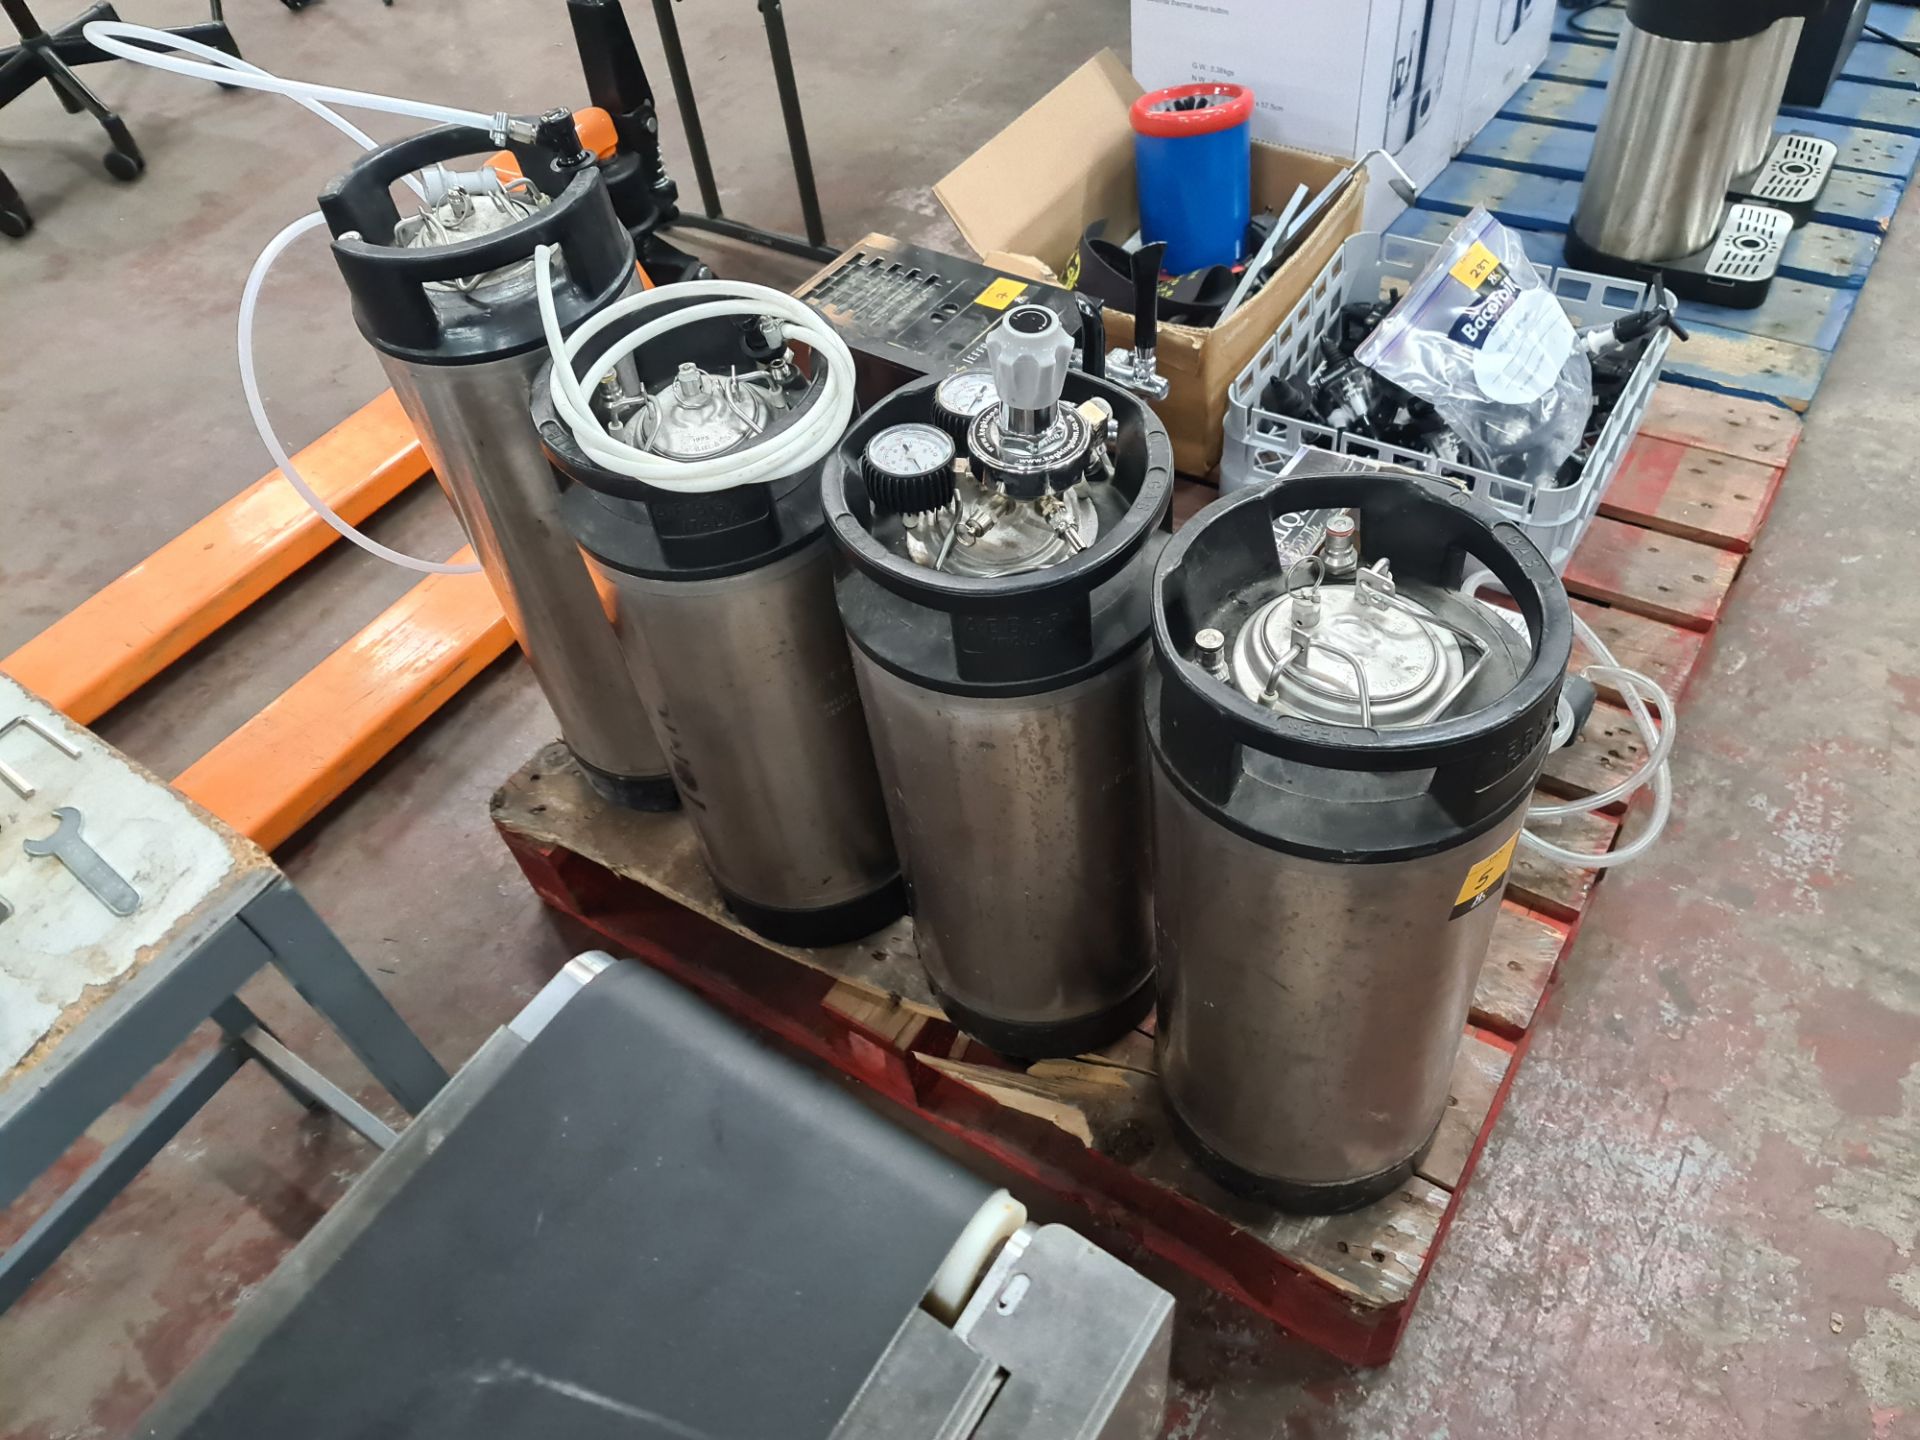 4 off pressurised cannisters, three of which appear to be empty and one of which appears to be full,